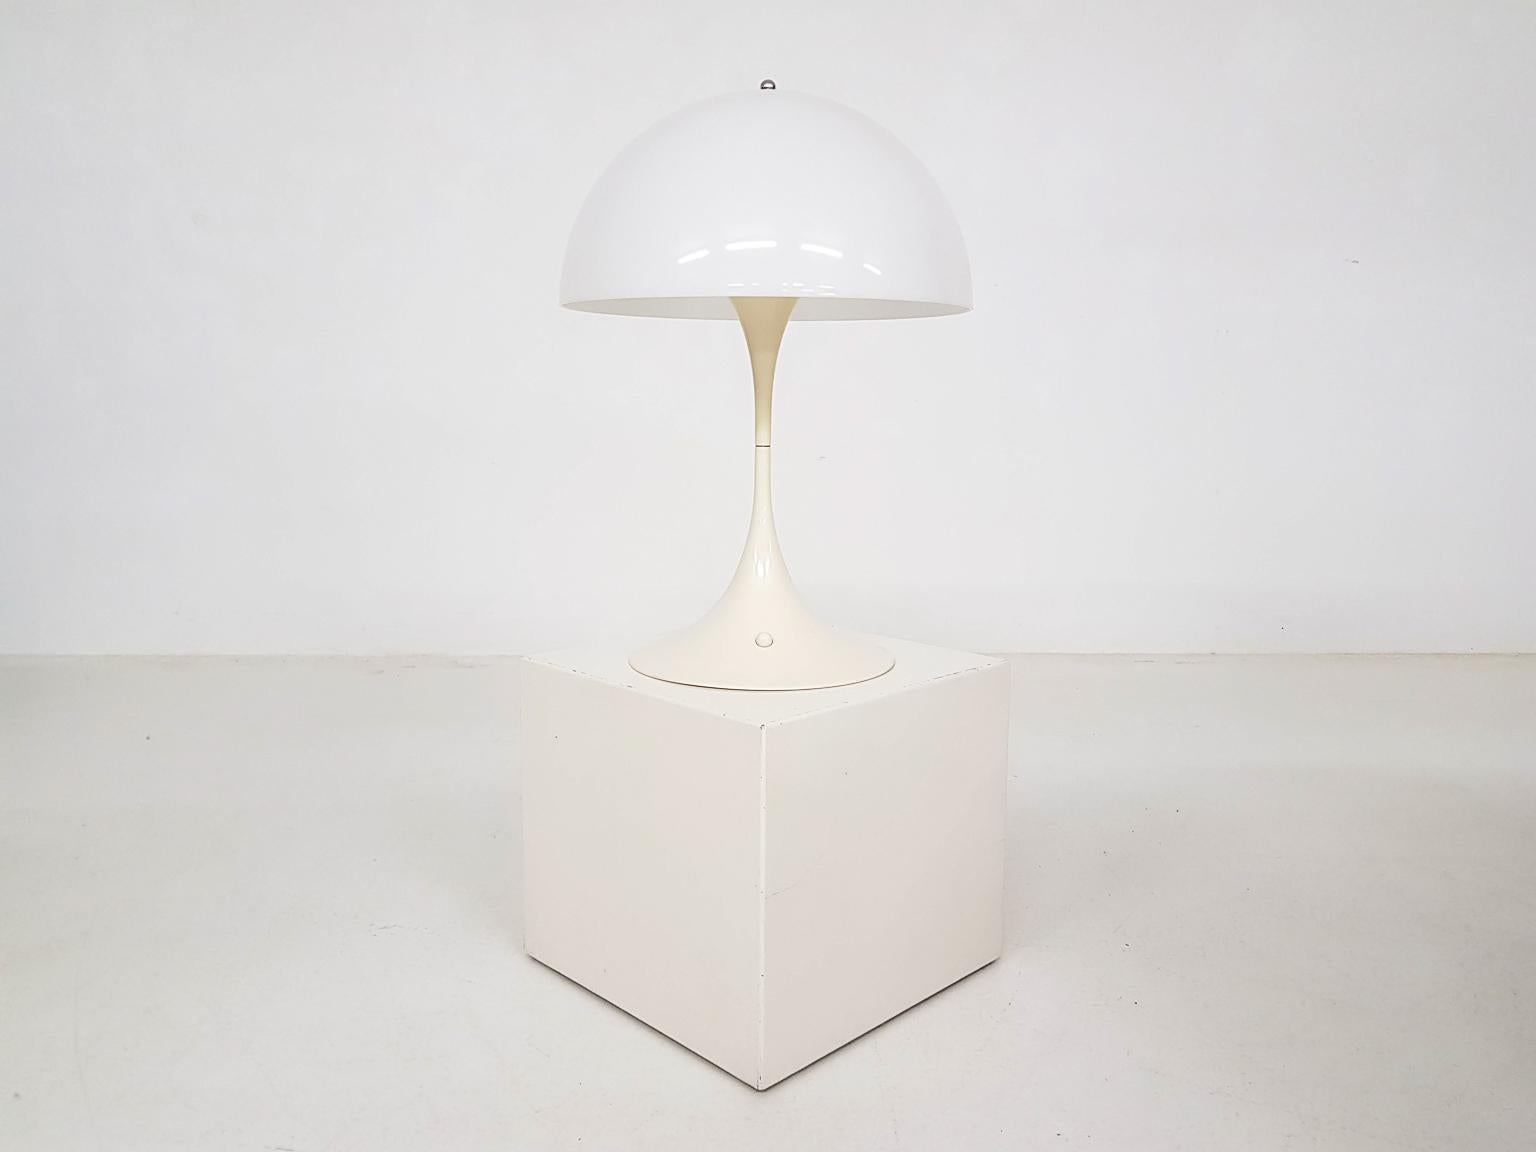 The famous table light by Verner Panton for Louis Poulsen. Designed in 1971.

Panton designed this table light in 1971 as a part of the Panthella collection. The light is still a classic and popular item today. The lamp features a Acryl shade that